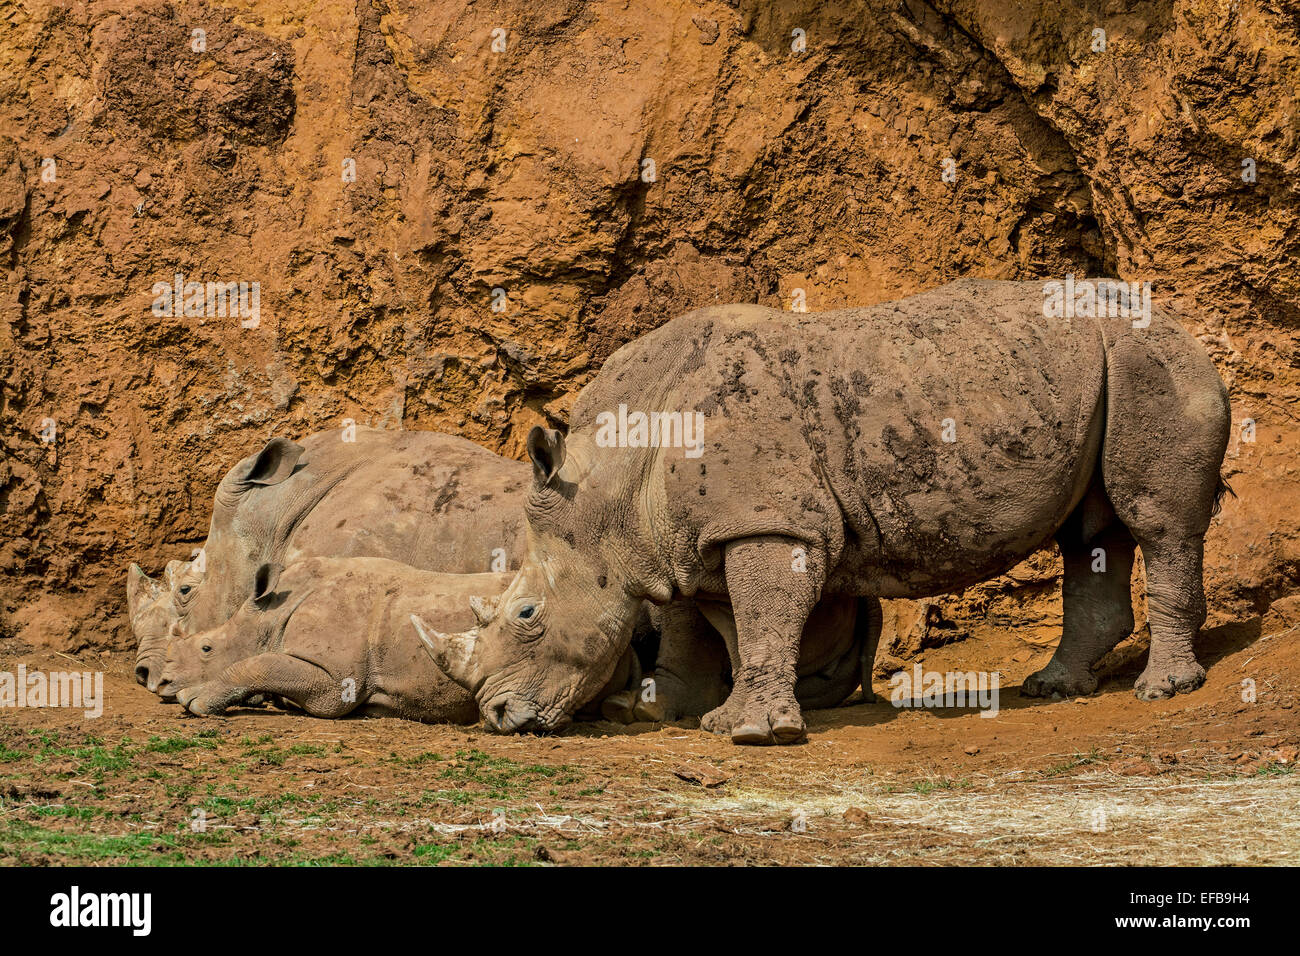 White rhino / Square-lipped rhinoceros (Ceratotherium simum) family group showing male, female and calf resting Stock Photo